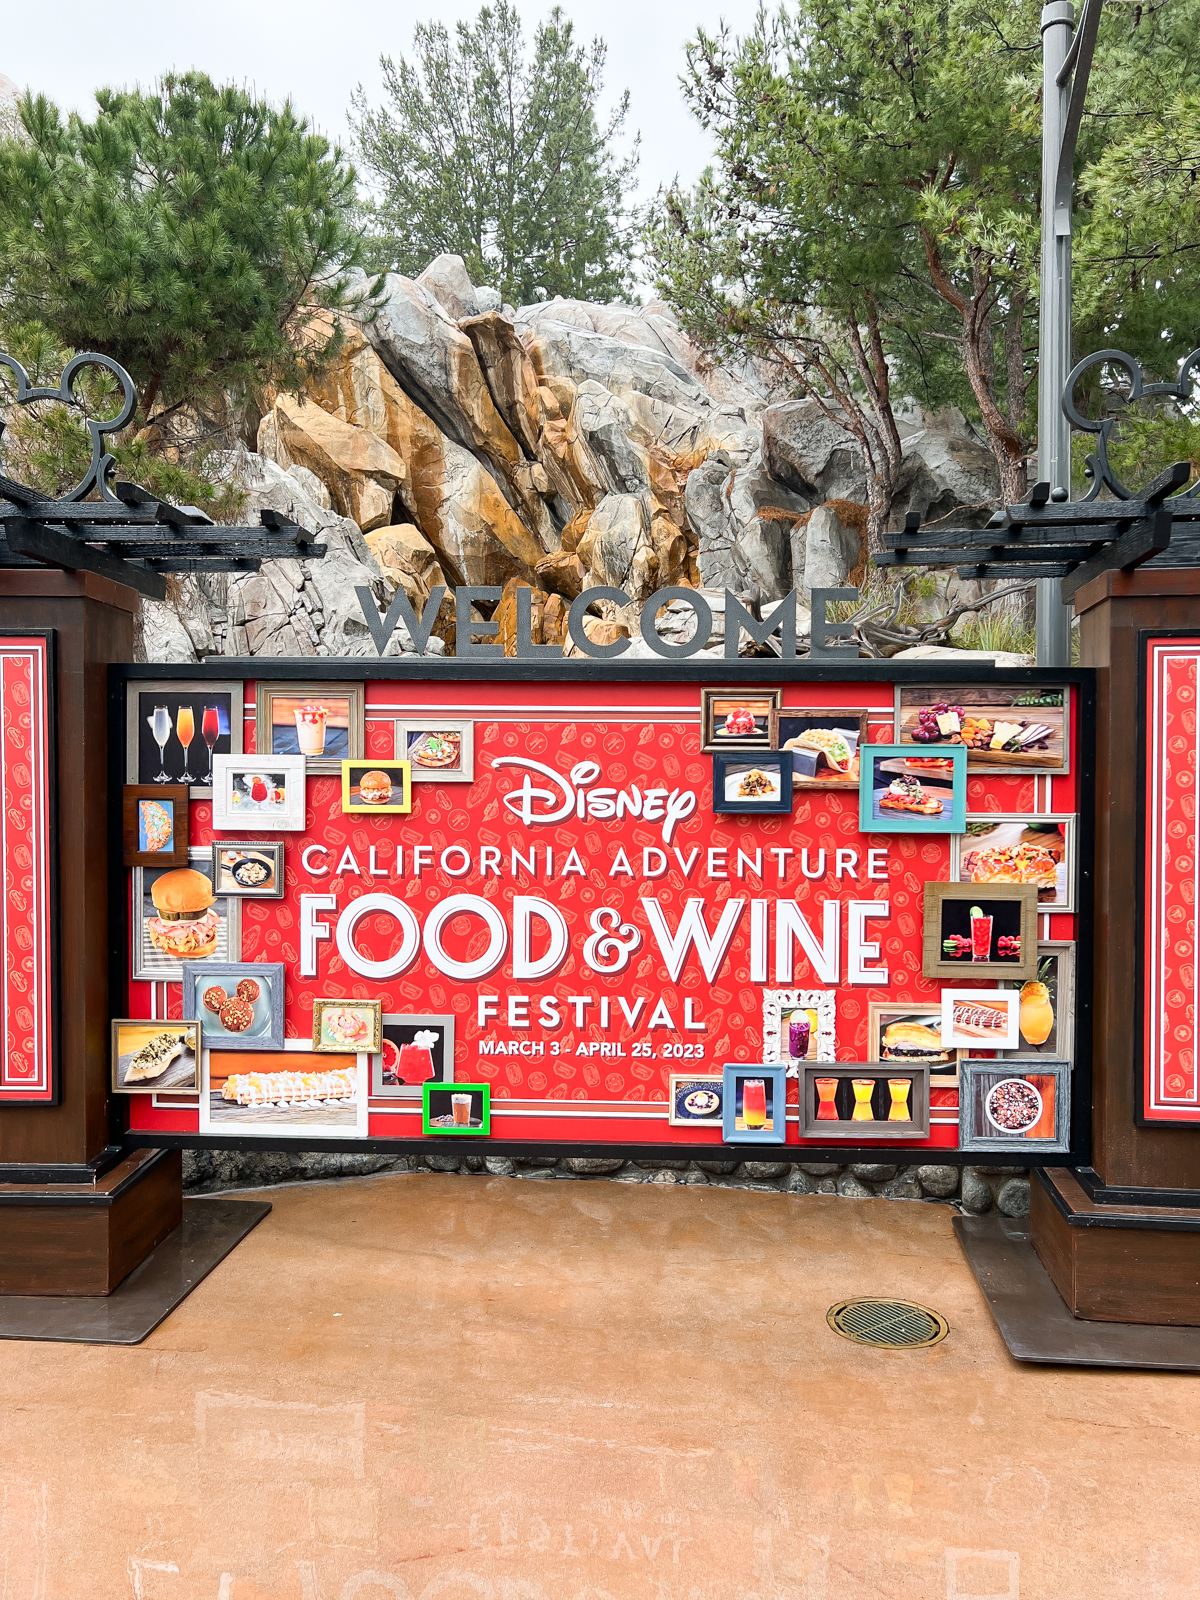 Disney food and wine festival sign